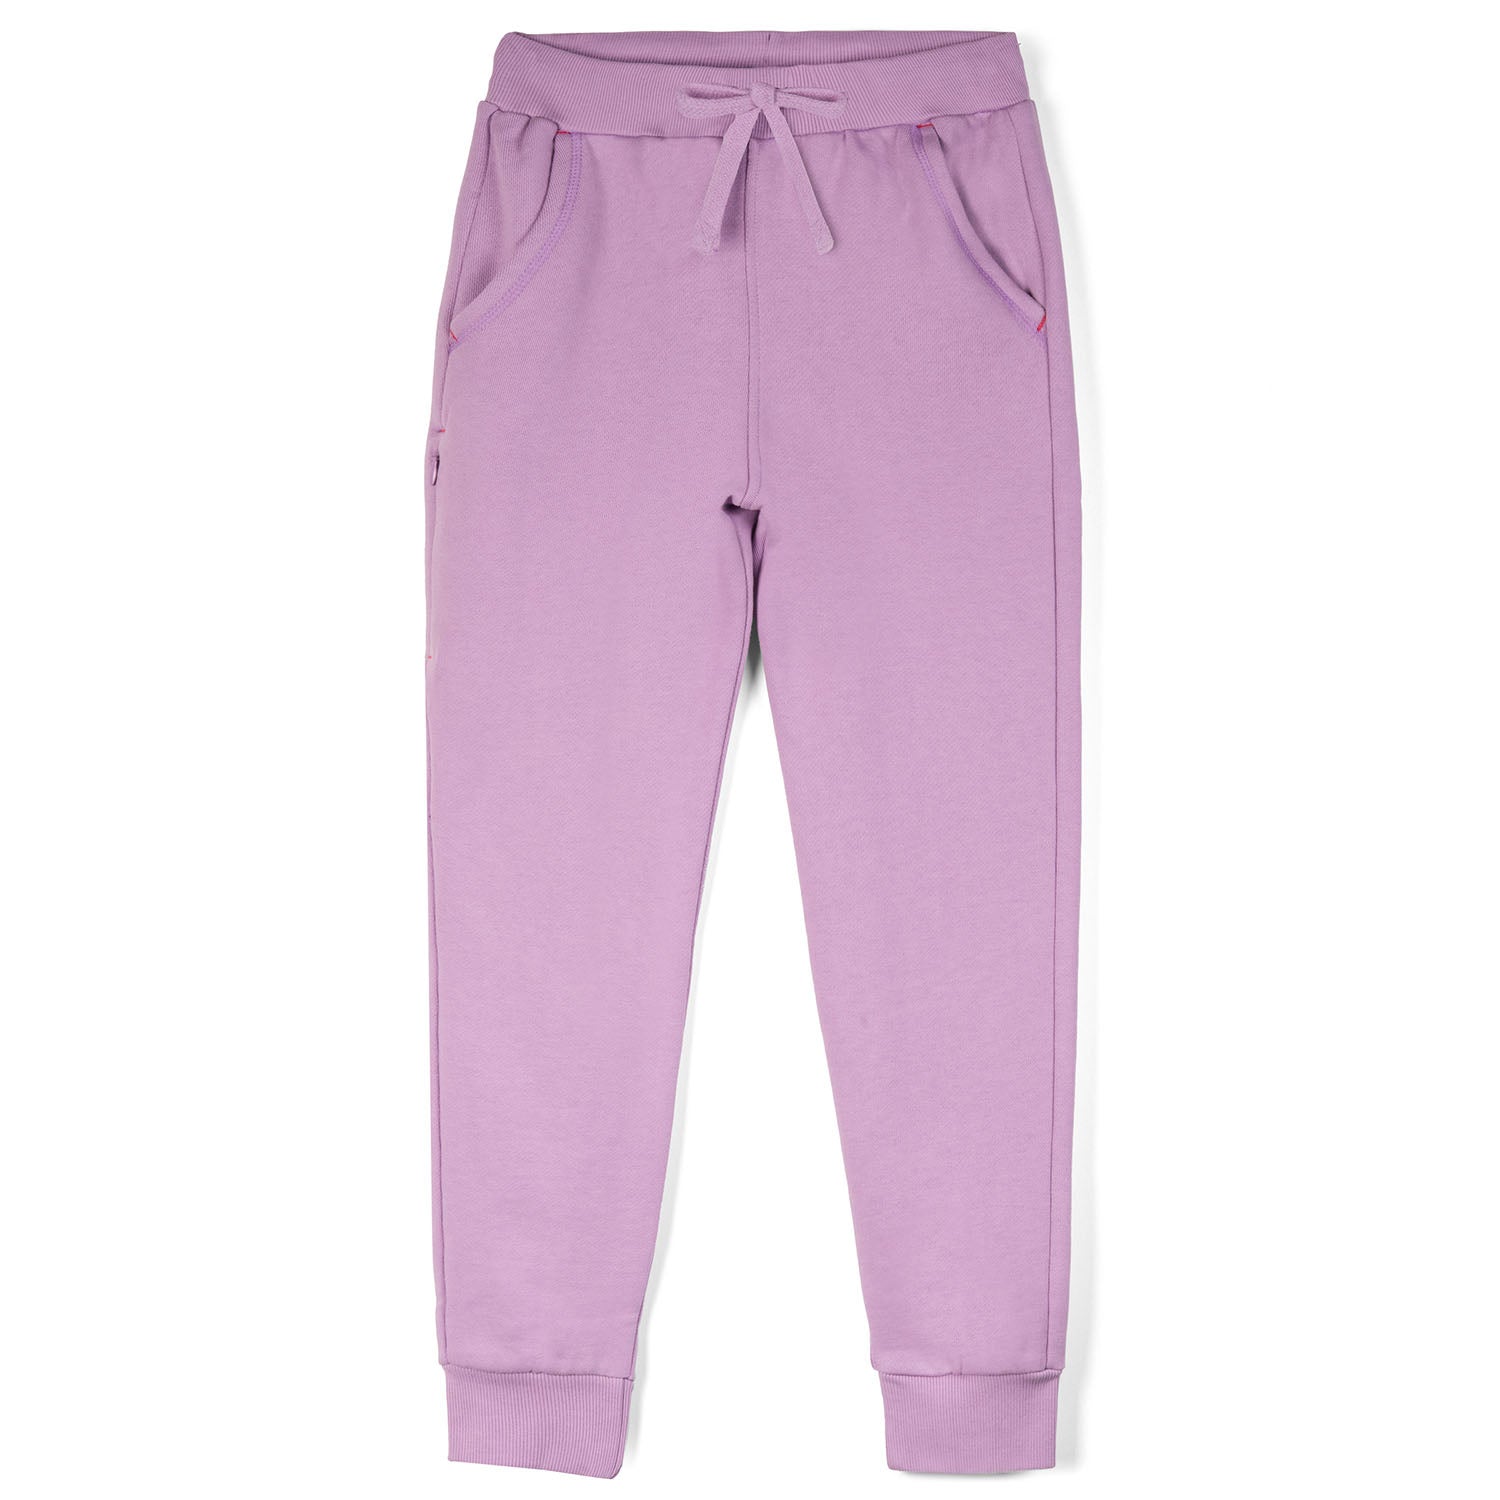 Affordable Wholesale hot pink sweatpants For Trendsetting Looks